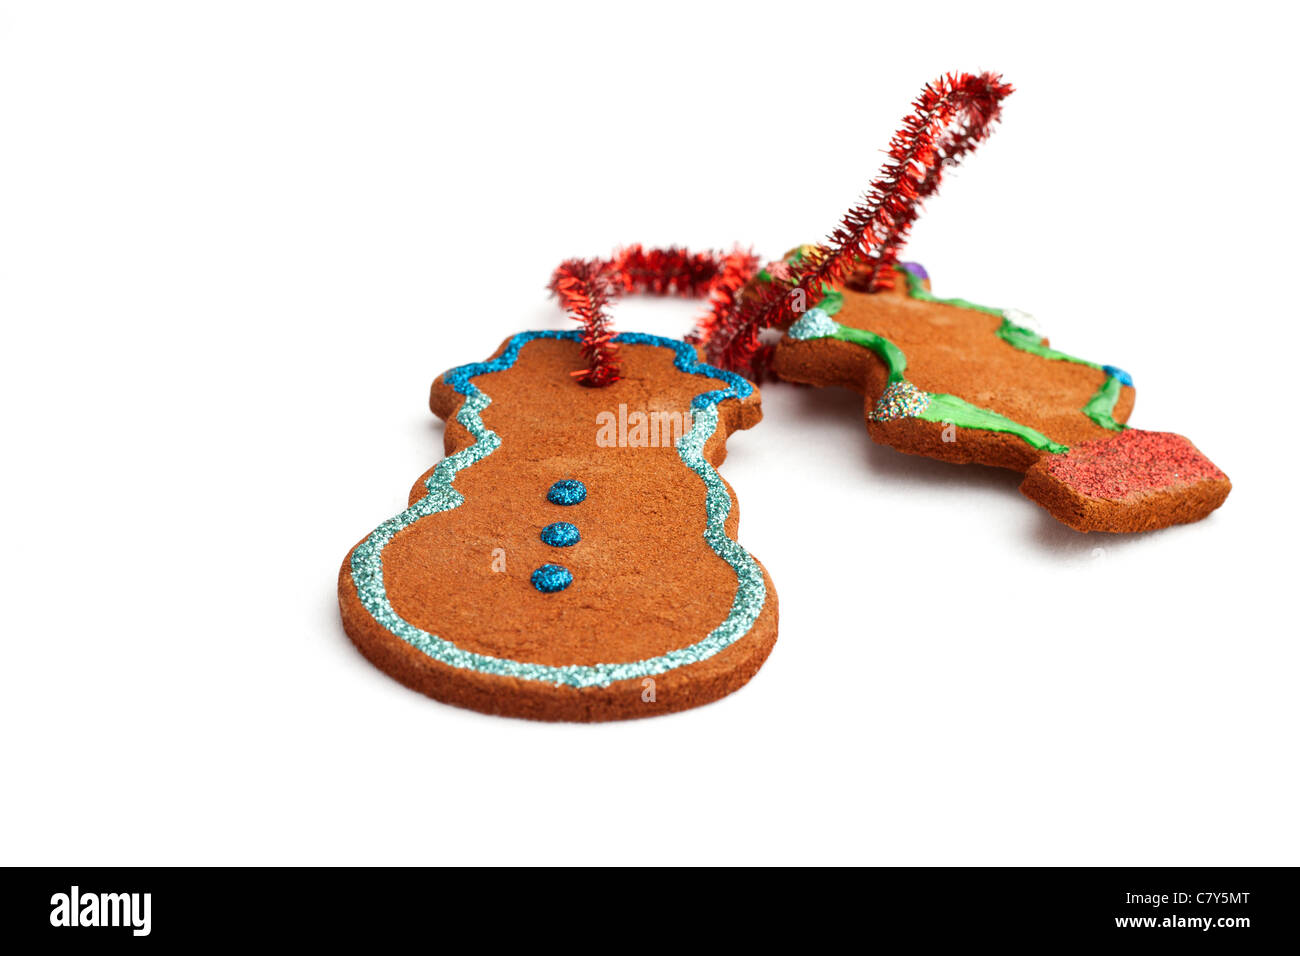 Two homemade gingerbread cookies against white background Stock Photo